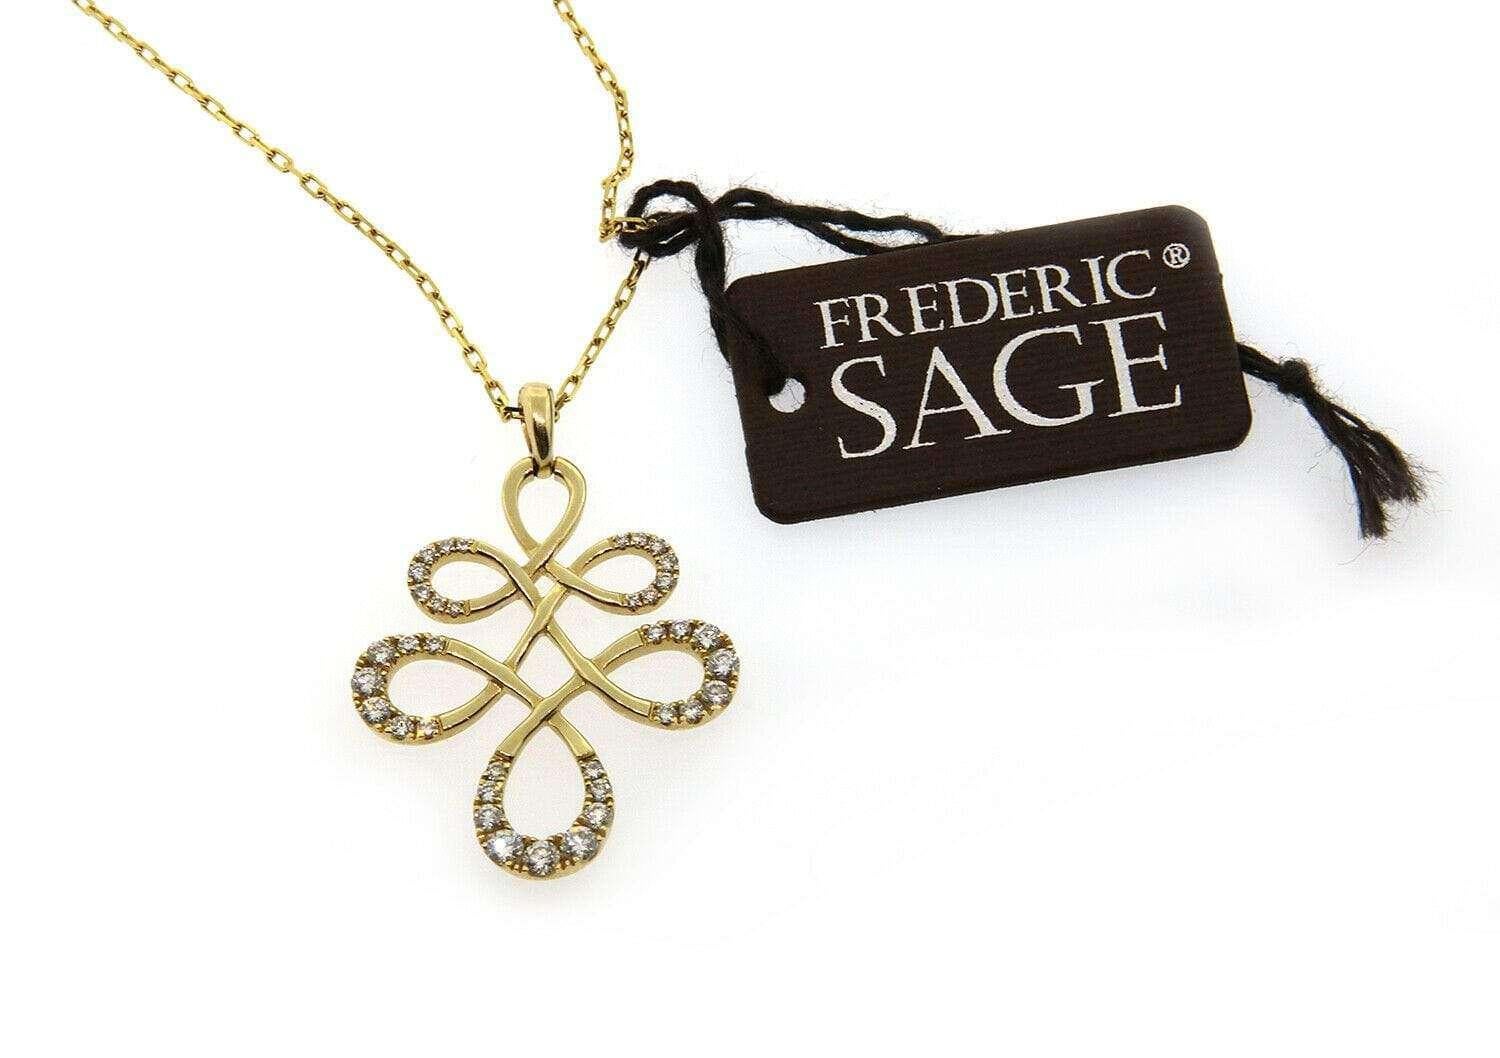 New Frederic Sage Diamond Swirl Pendant Necklace in 14K For Sale 4